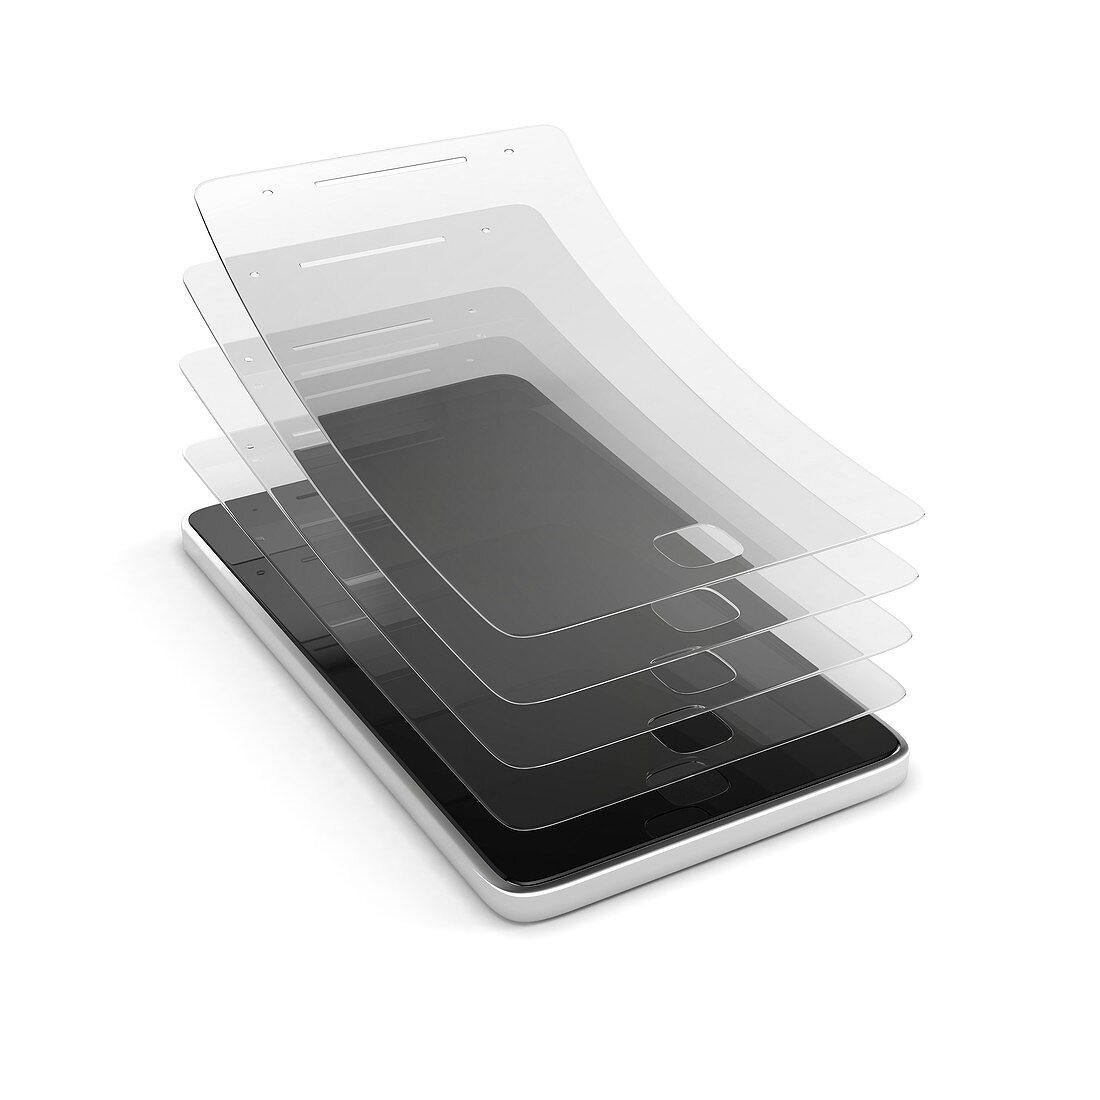 Protective film for screen, illustration